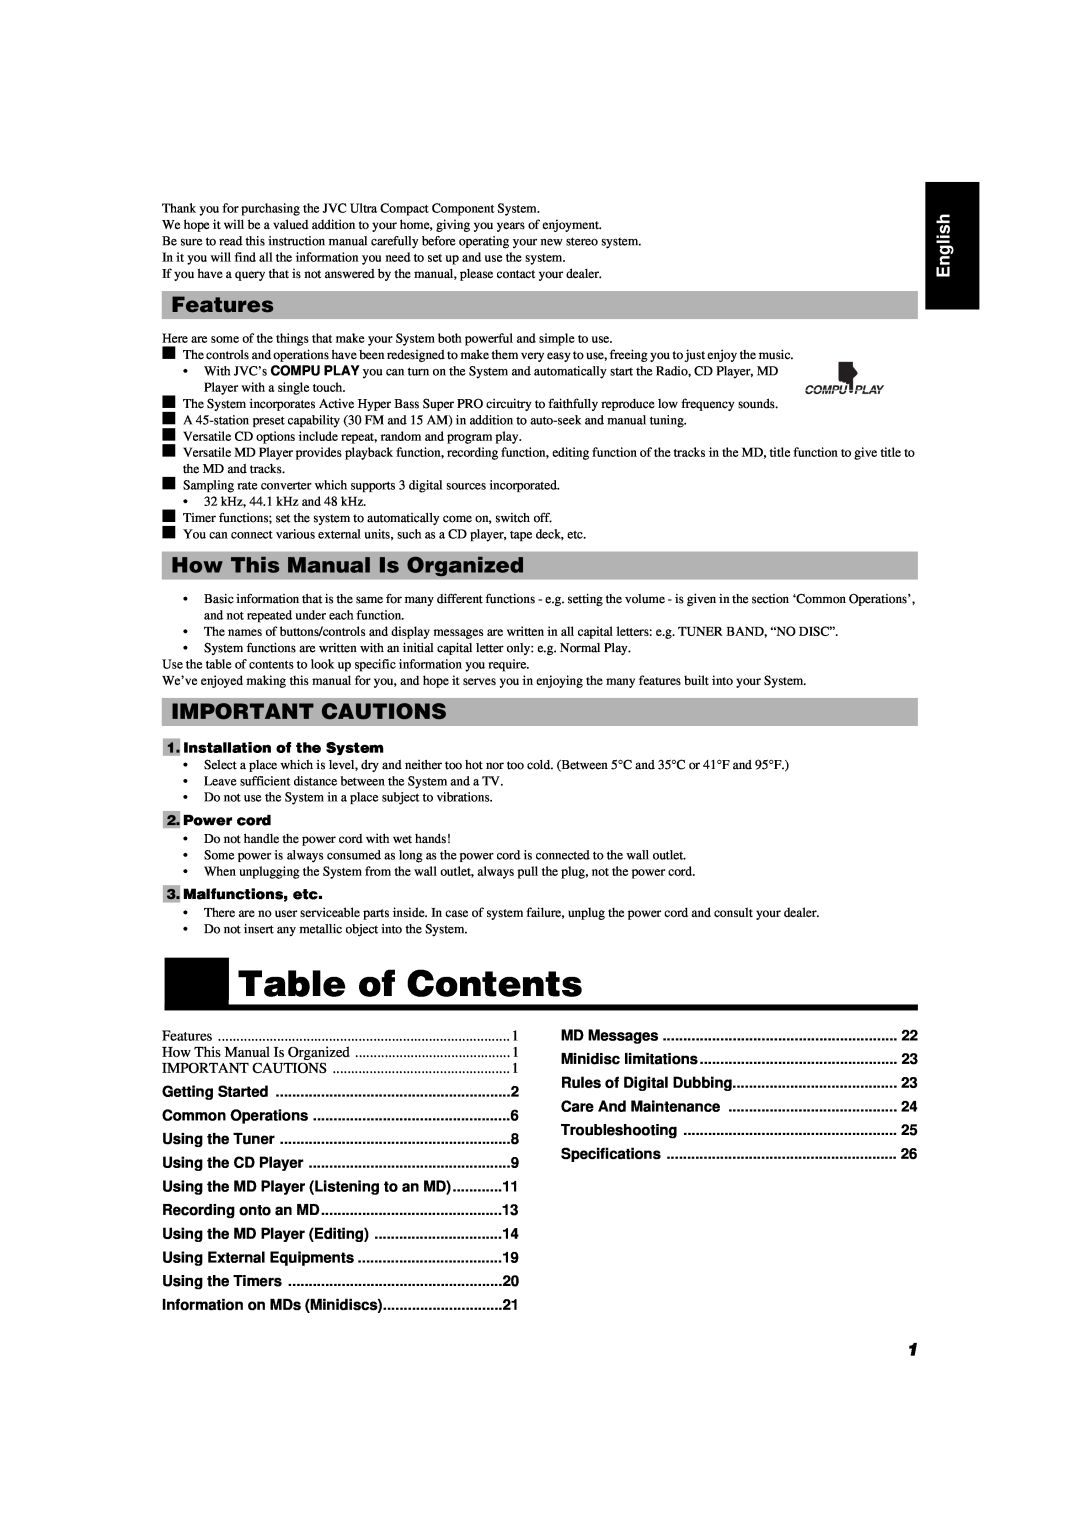 JVC FS-MD9000 manual Table of Contents, Features, How This Manual Is Organized, Important Cautions, English, Power cord 